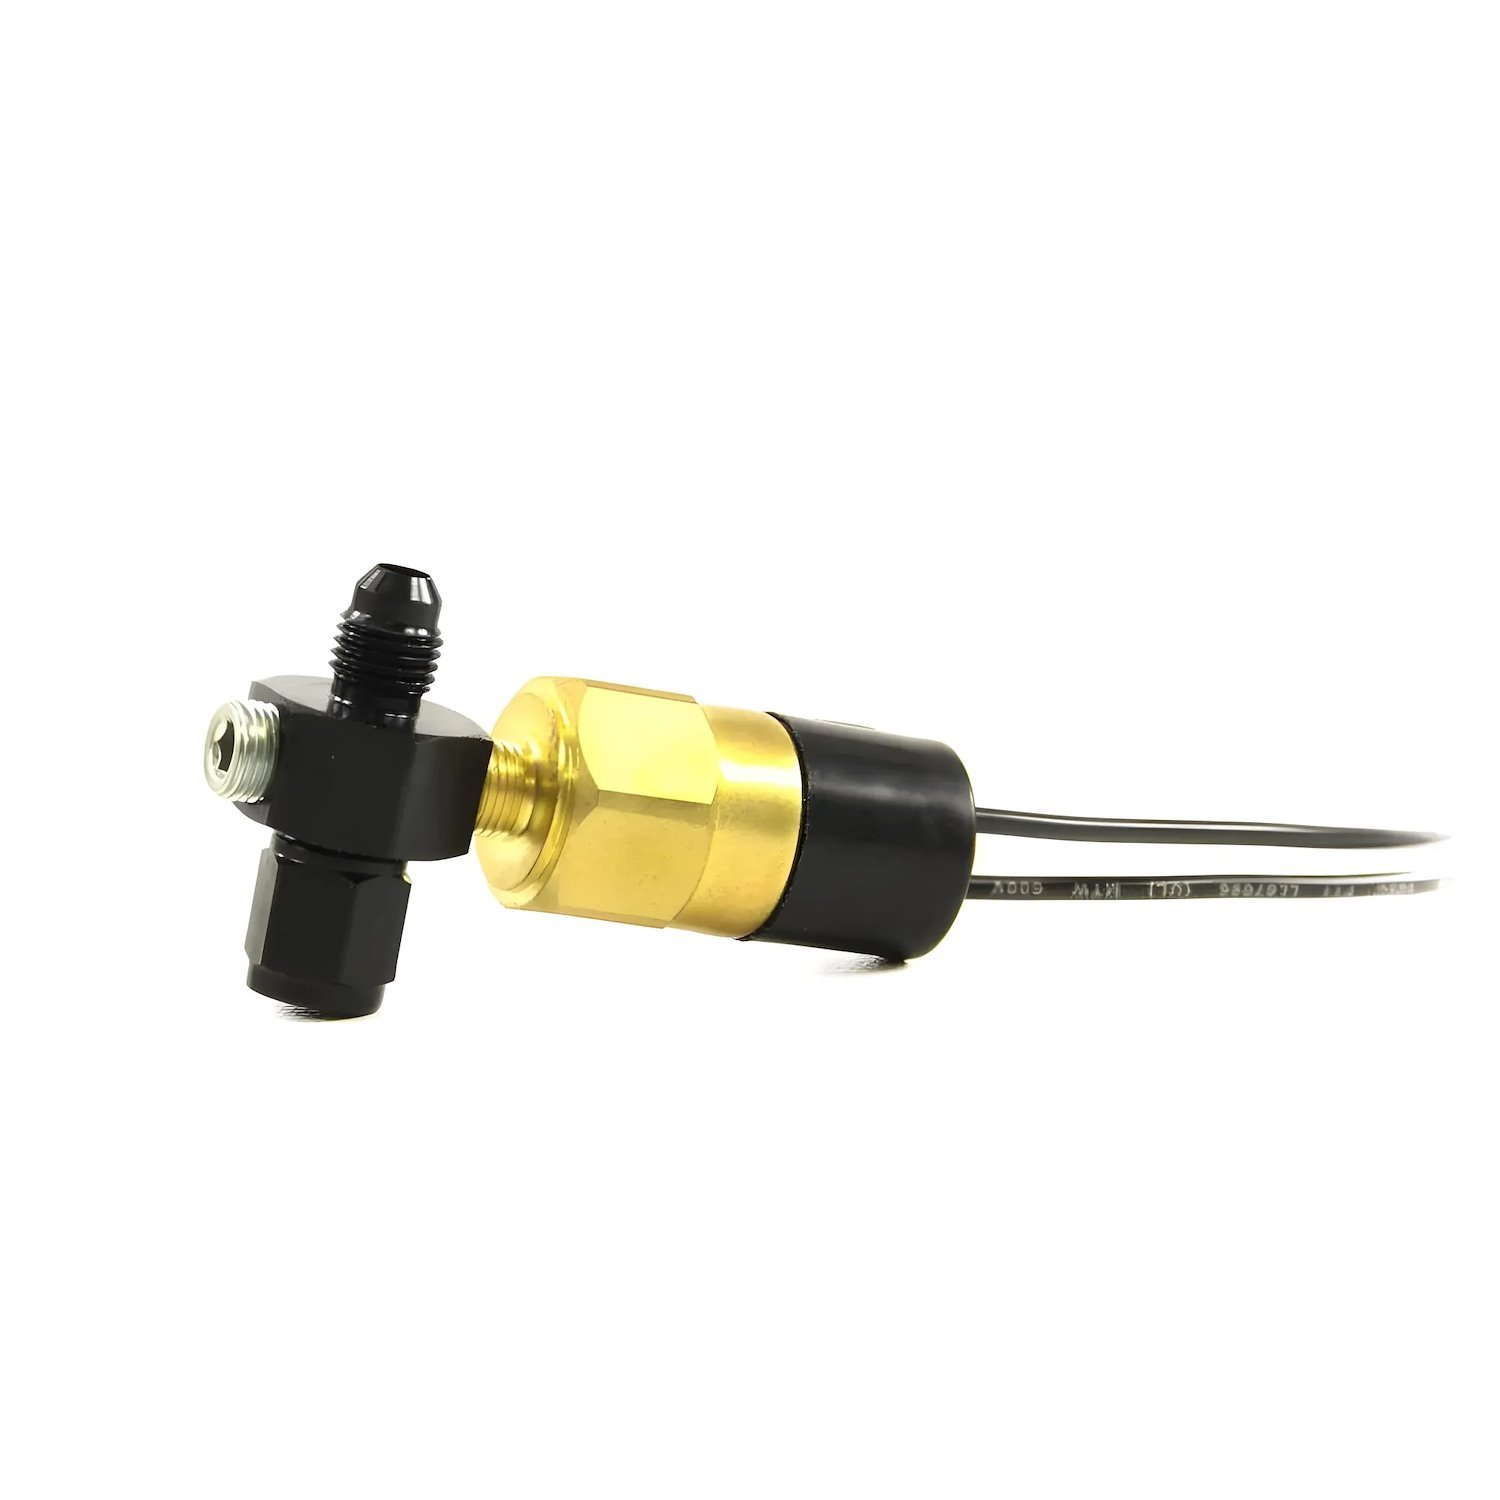 00-60001-4 Fuel Pressure Safety Switch, 4AN Manifold/High Pressure/Preset 35 psi/Adjustable 20-120 psi